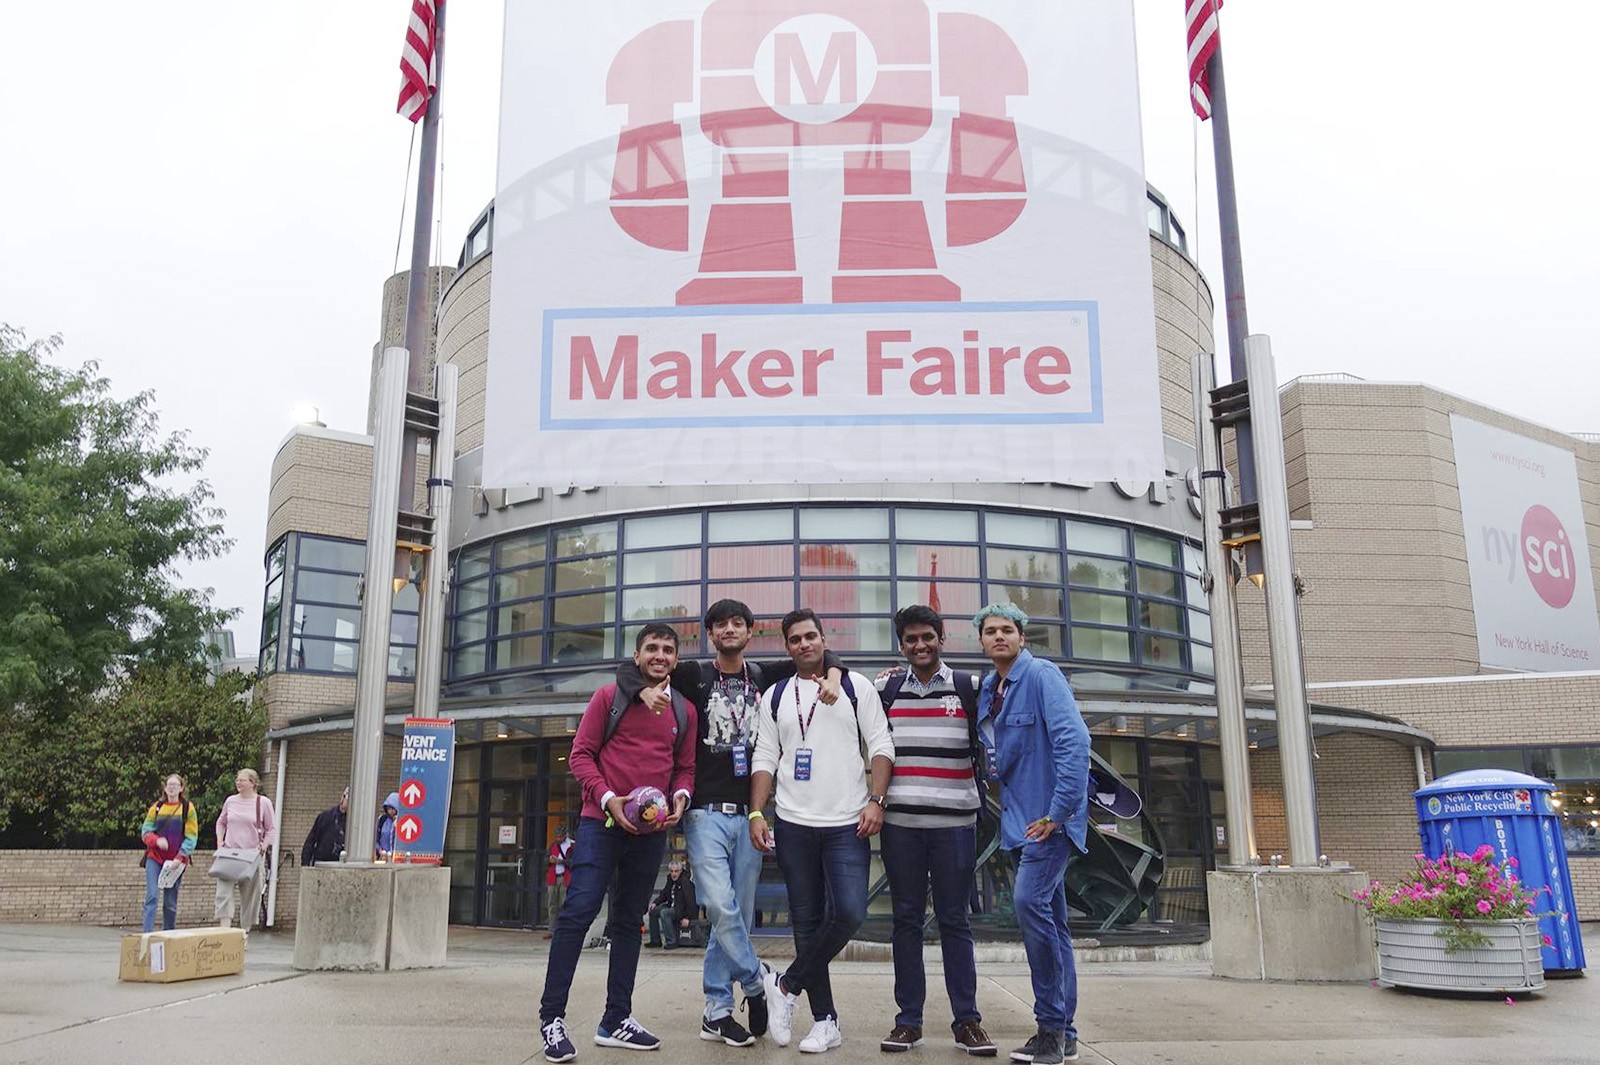 The team took part in the World Maker Faire in New York to showcase their application that aids bowling athletes with visual impairment.